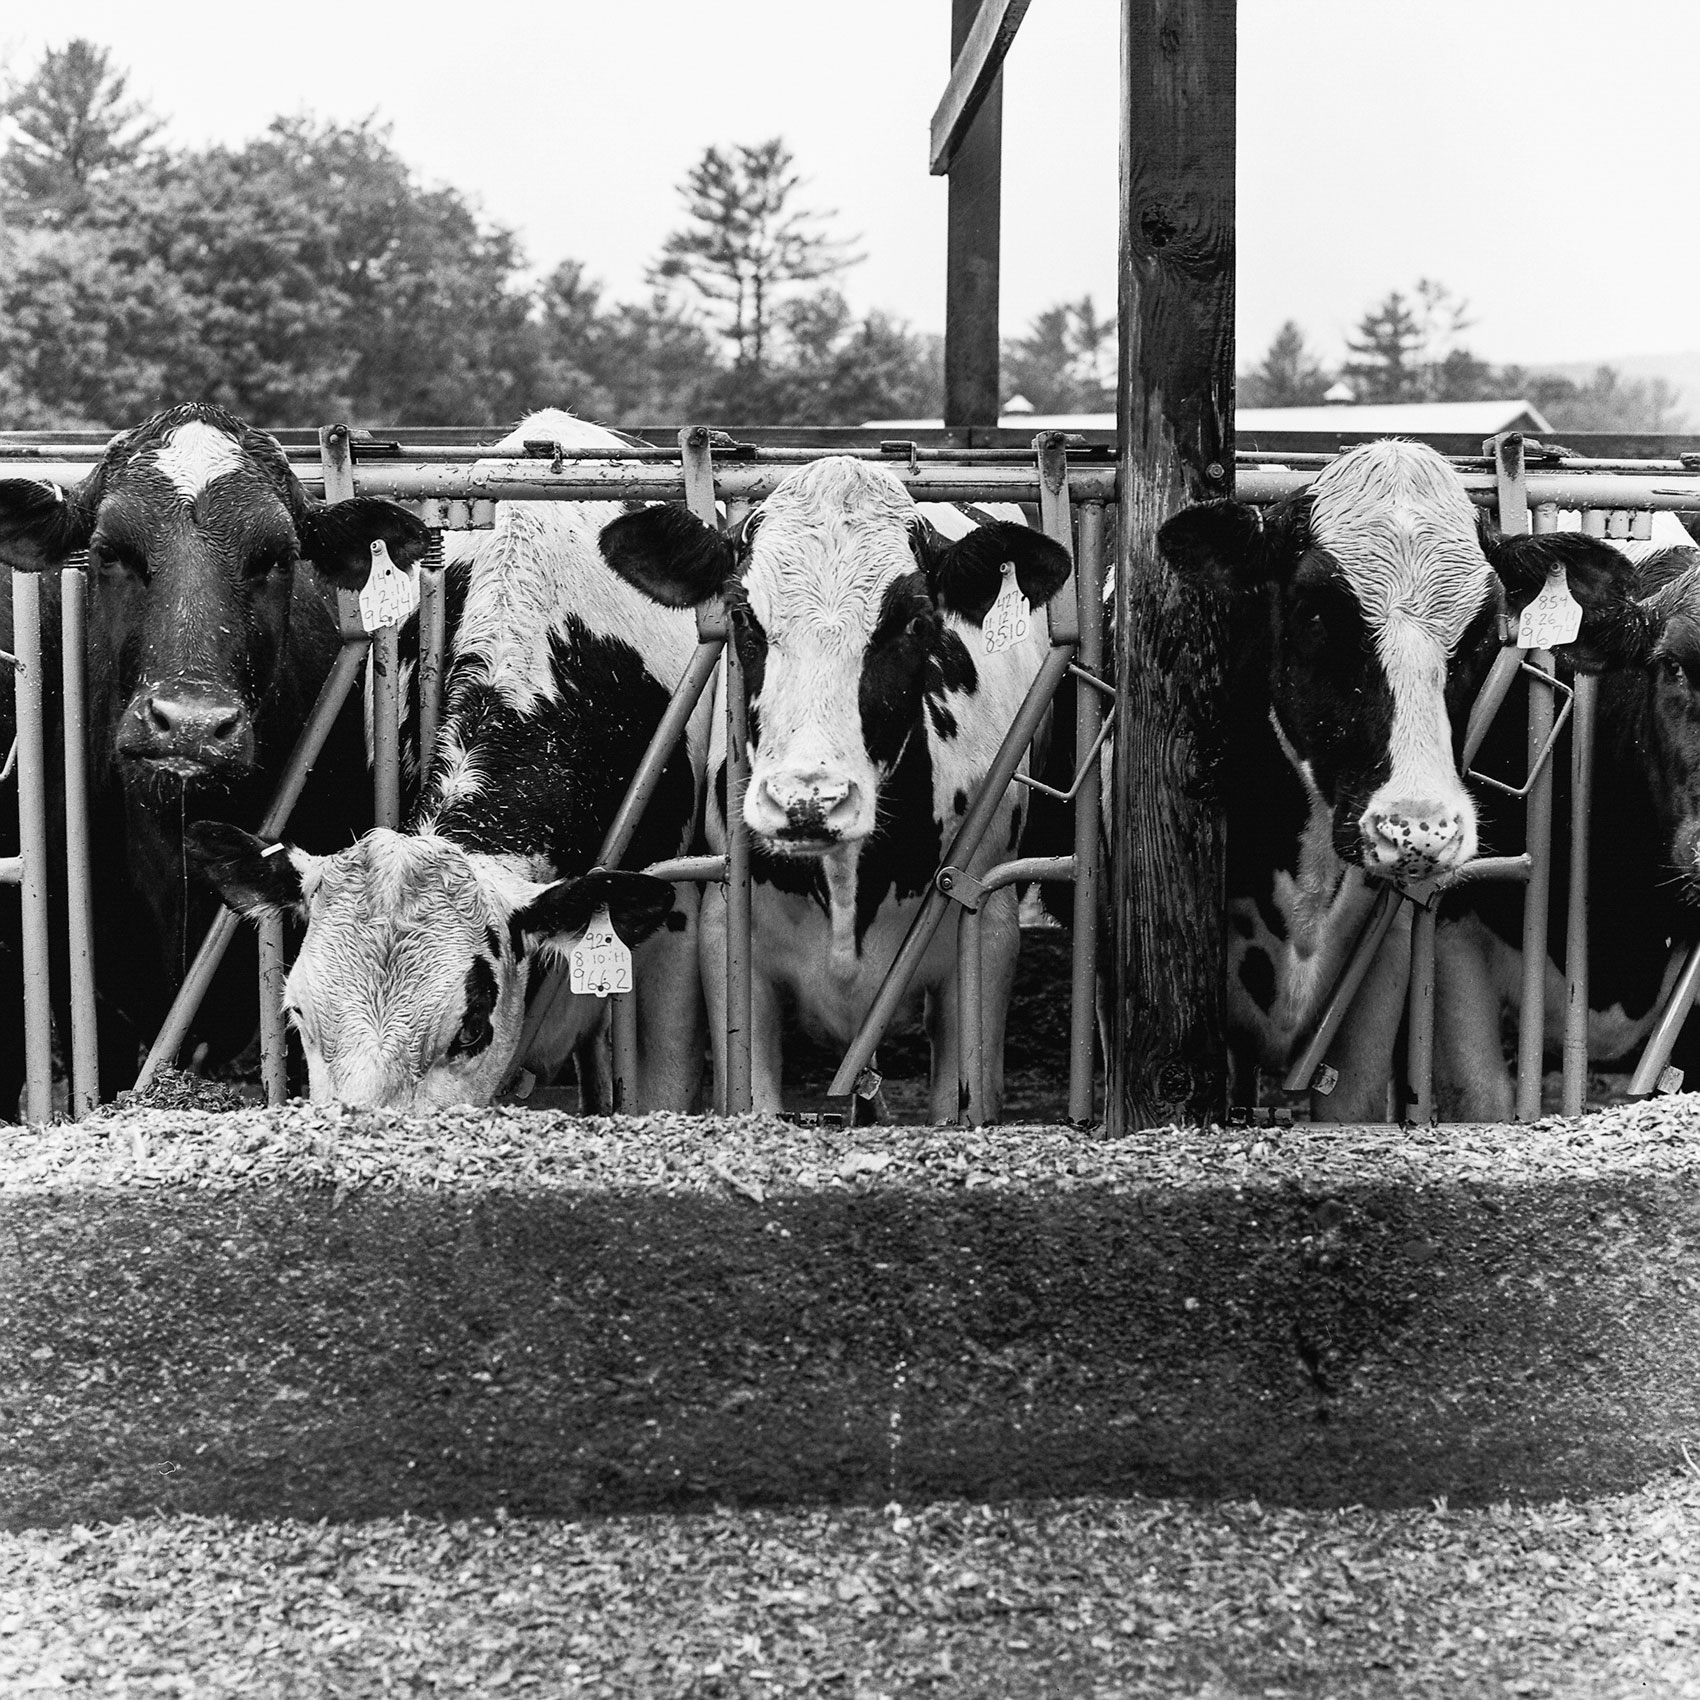 Black and White shot of cows on a farm upstate